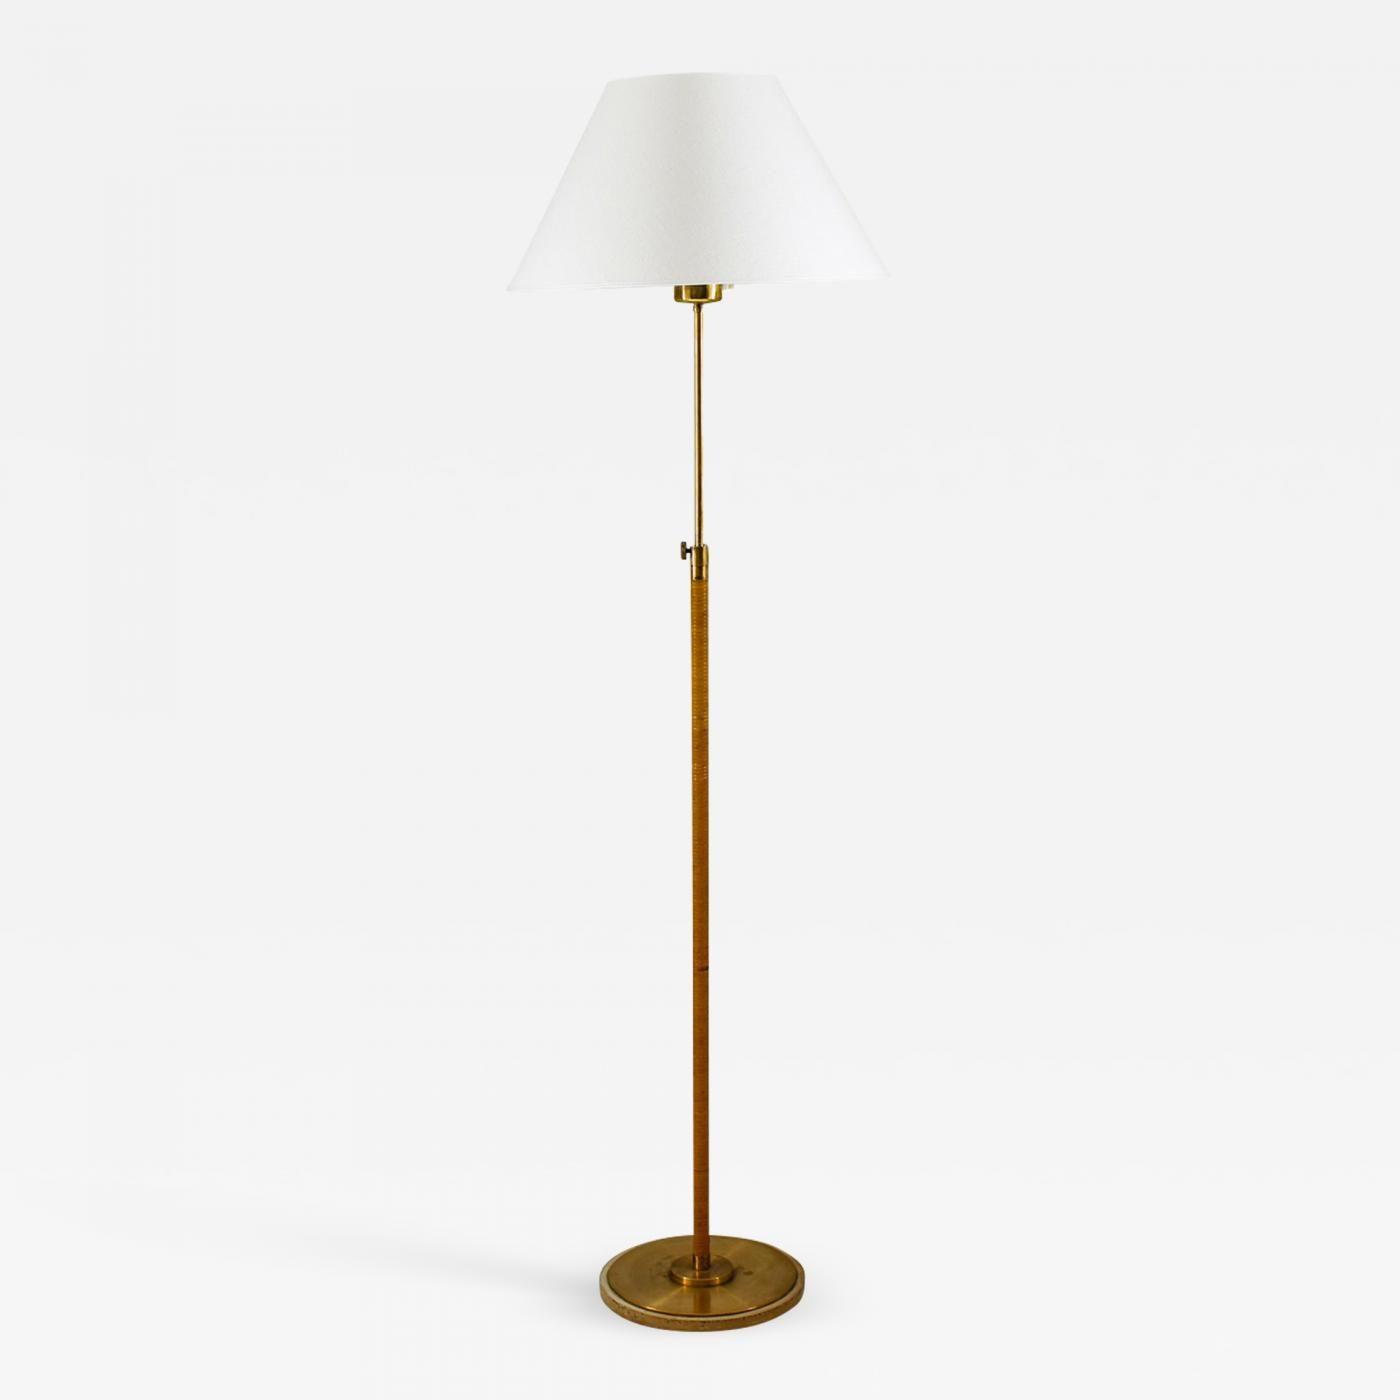 Swedish Modern Midcentury Floor Lamp In Brass And Rattan 1940s throughout dimensions 1400 X 1400